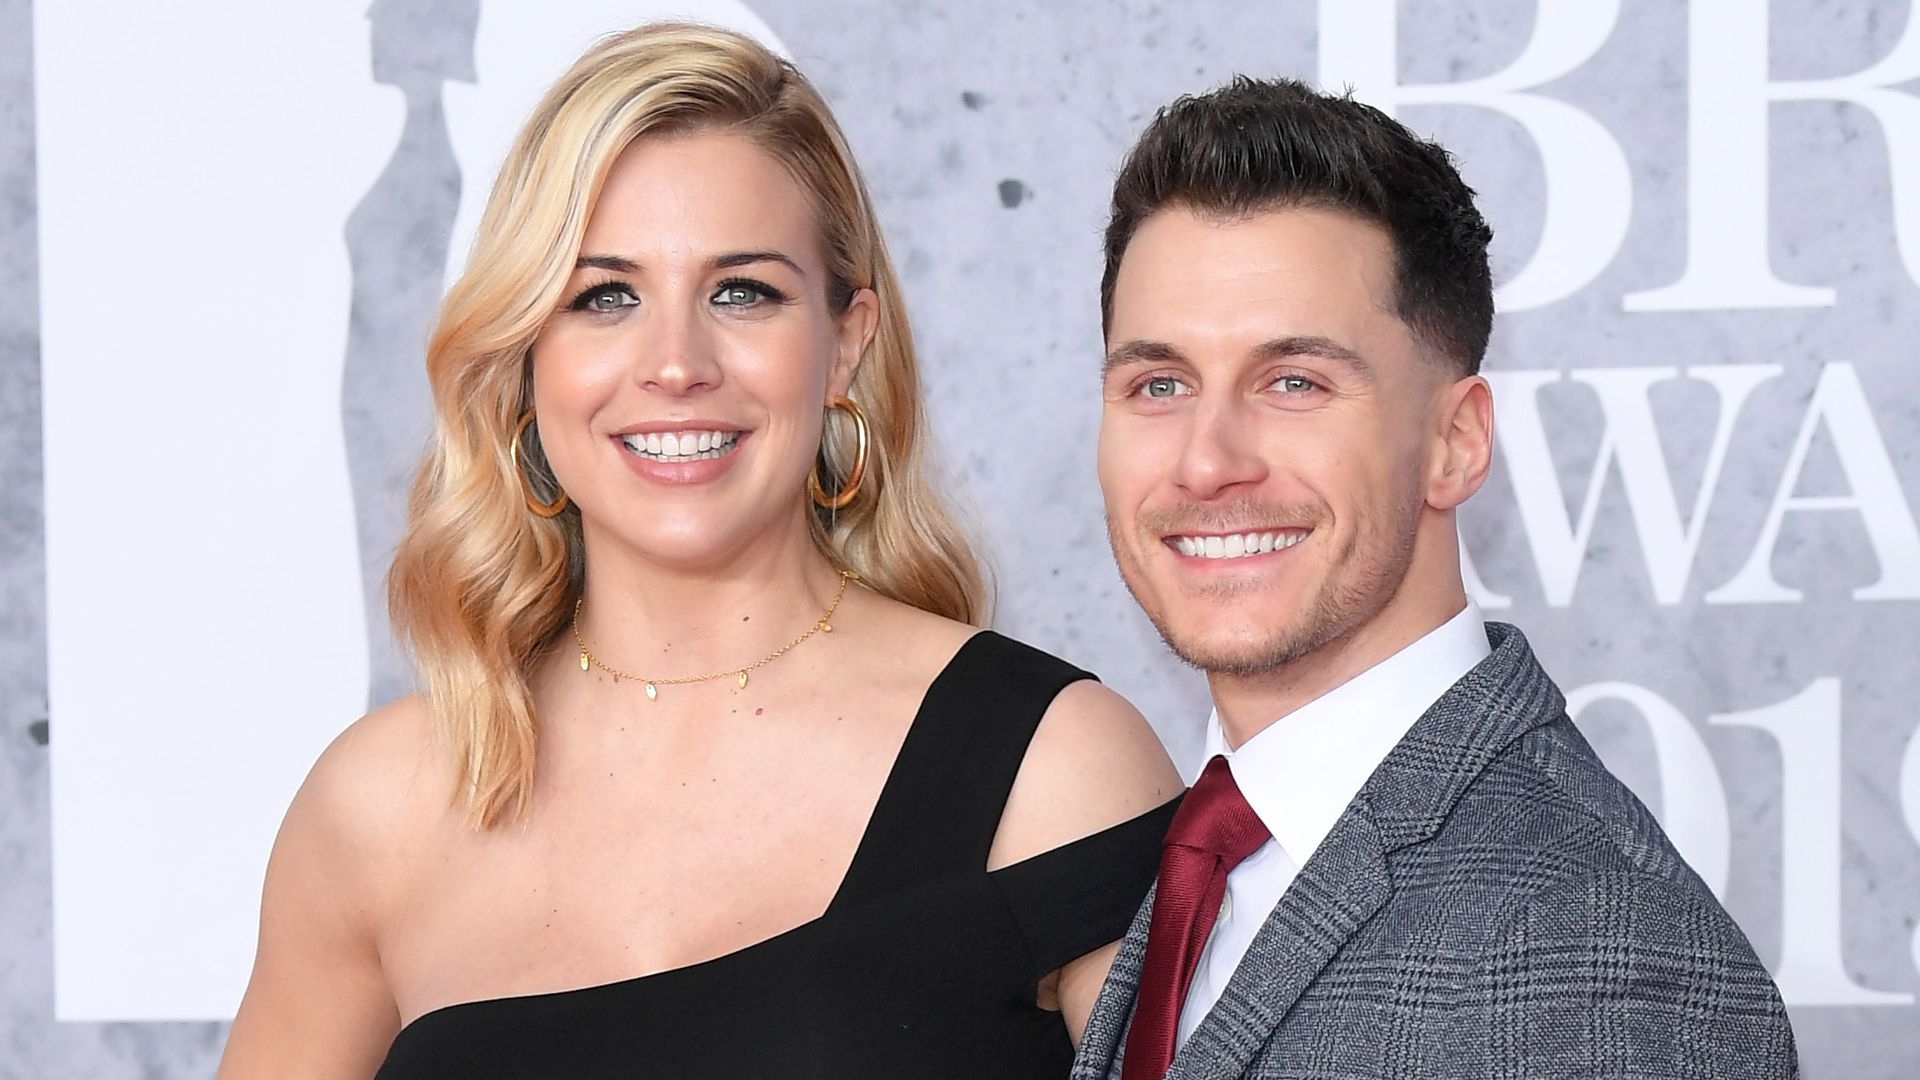 Gemma Atkinson and Gorka Marquez at the Brits in 2019